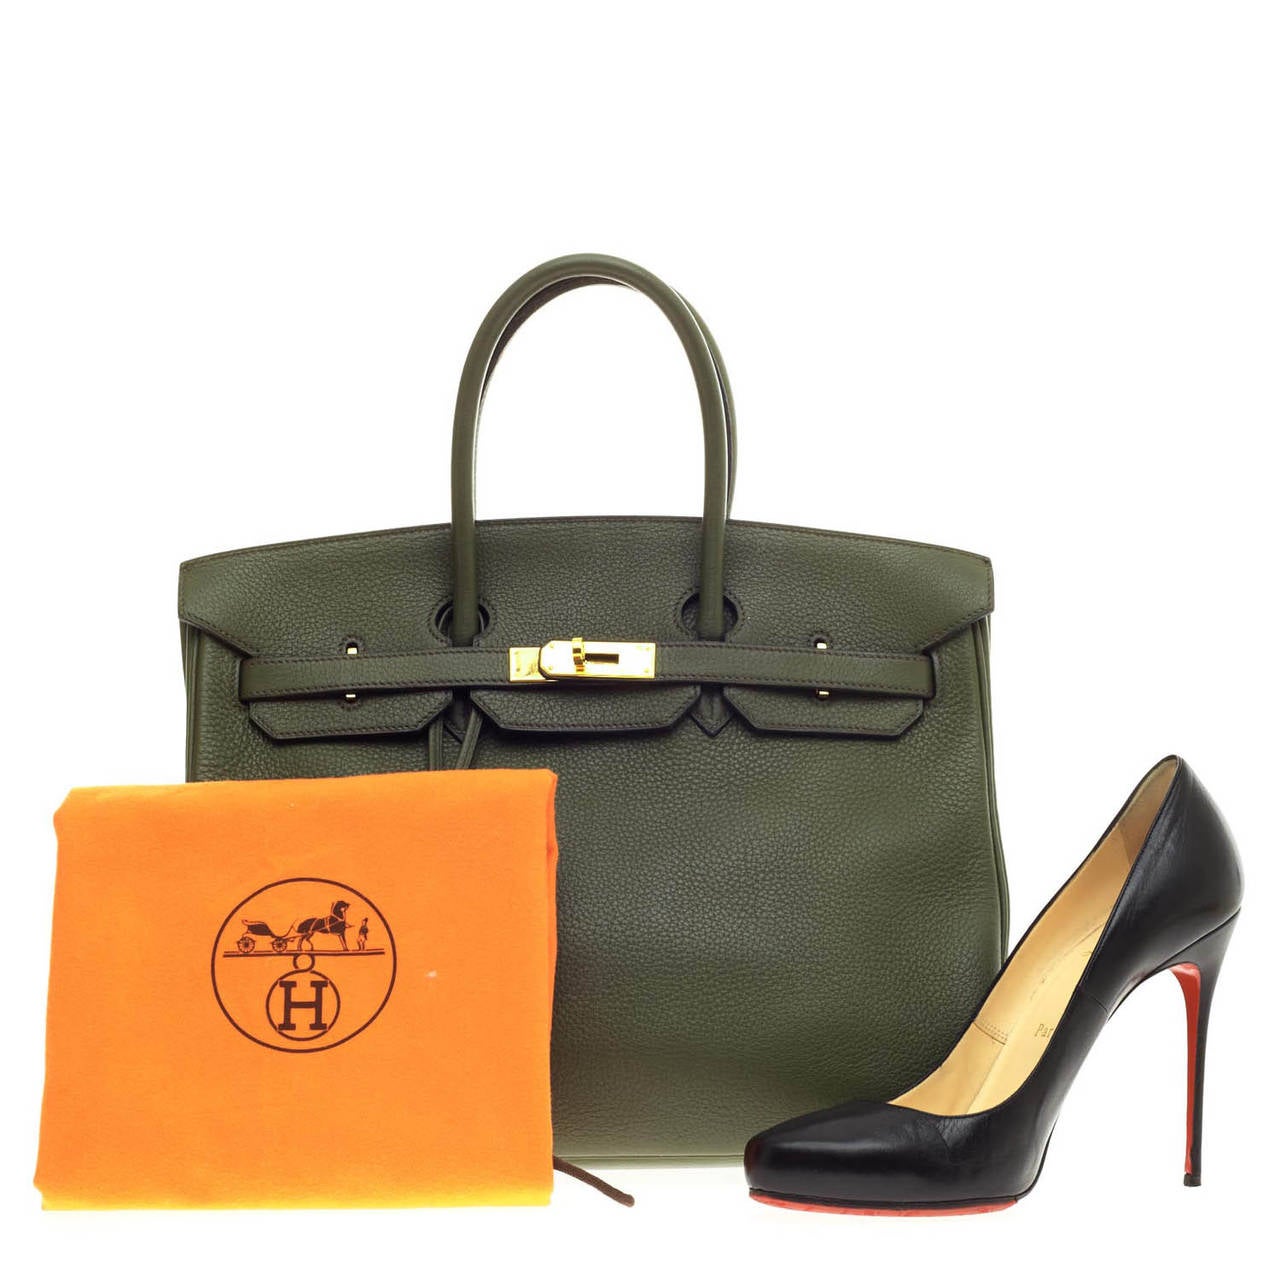 This beautiful authentic Hermes Birkin in size 35 in  is constructed with soft, scratch-resistant Togo Leather and accented with polished Gold hardware. Revered as the most desired handbag, this Birkin's rich olive green color is modest yet